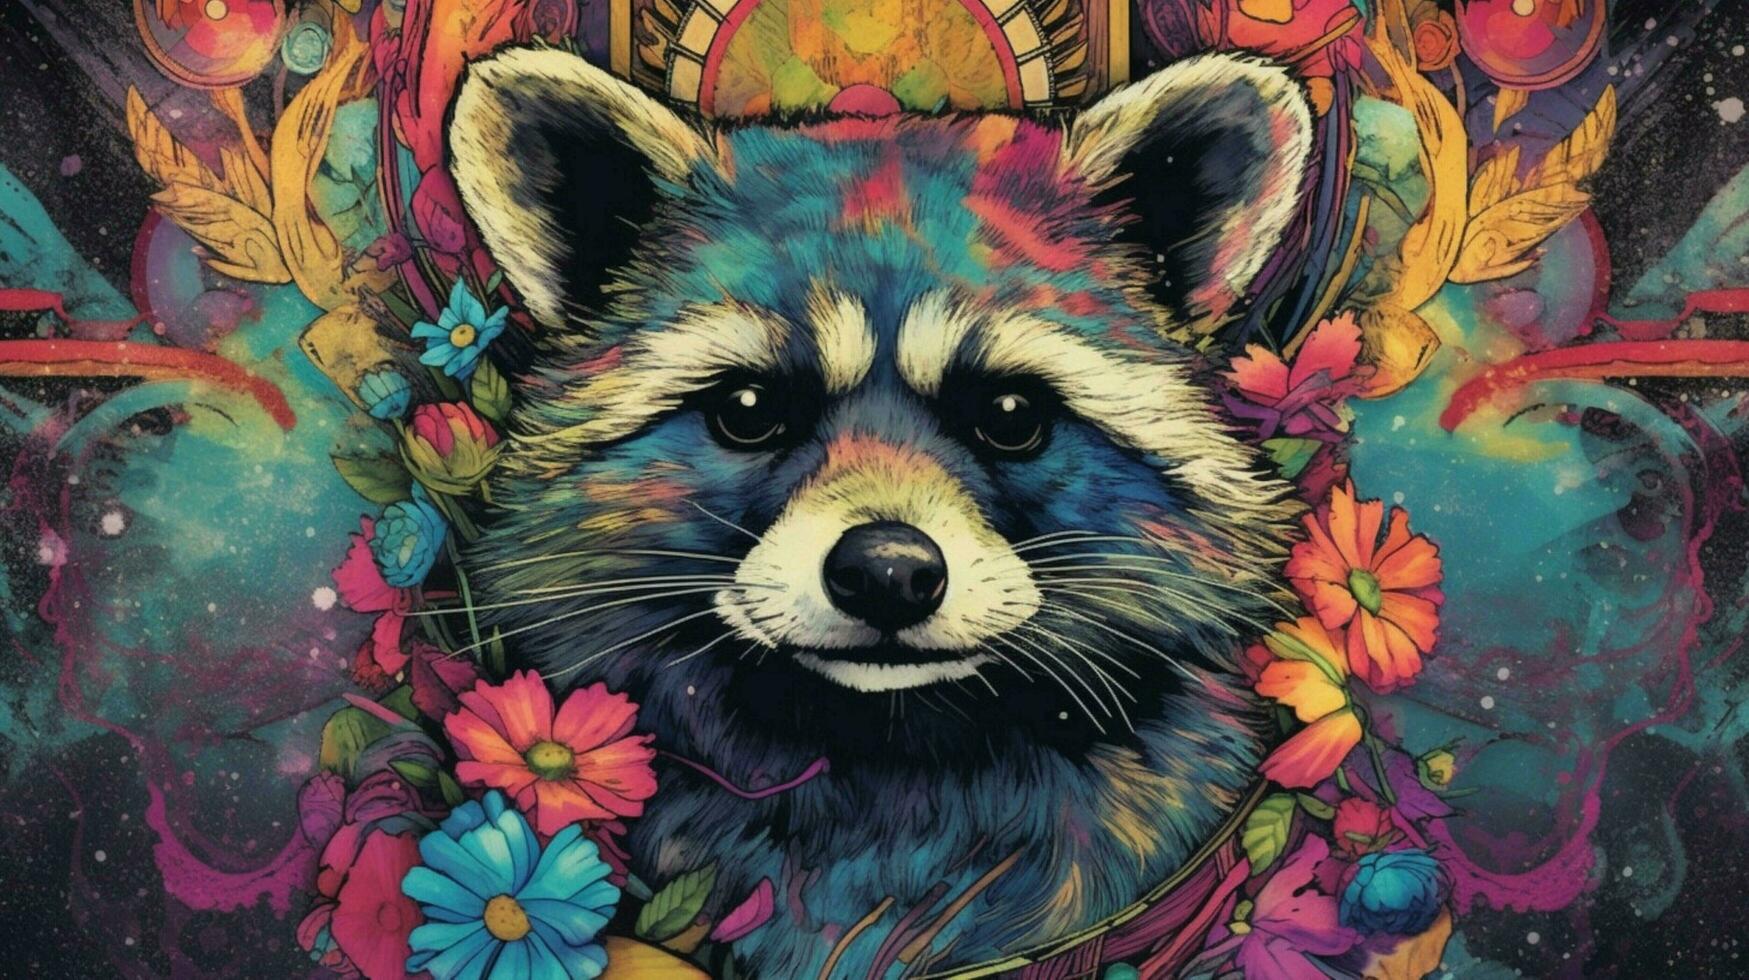 a colorful poster for a band called raccoon photo